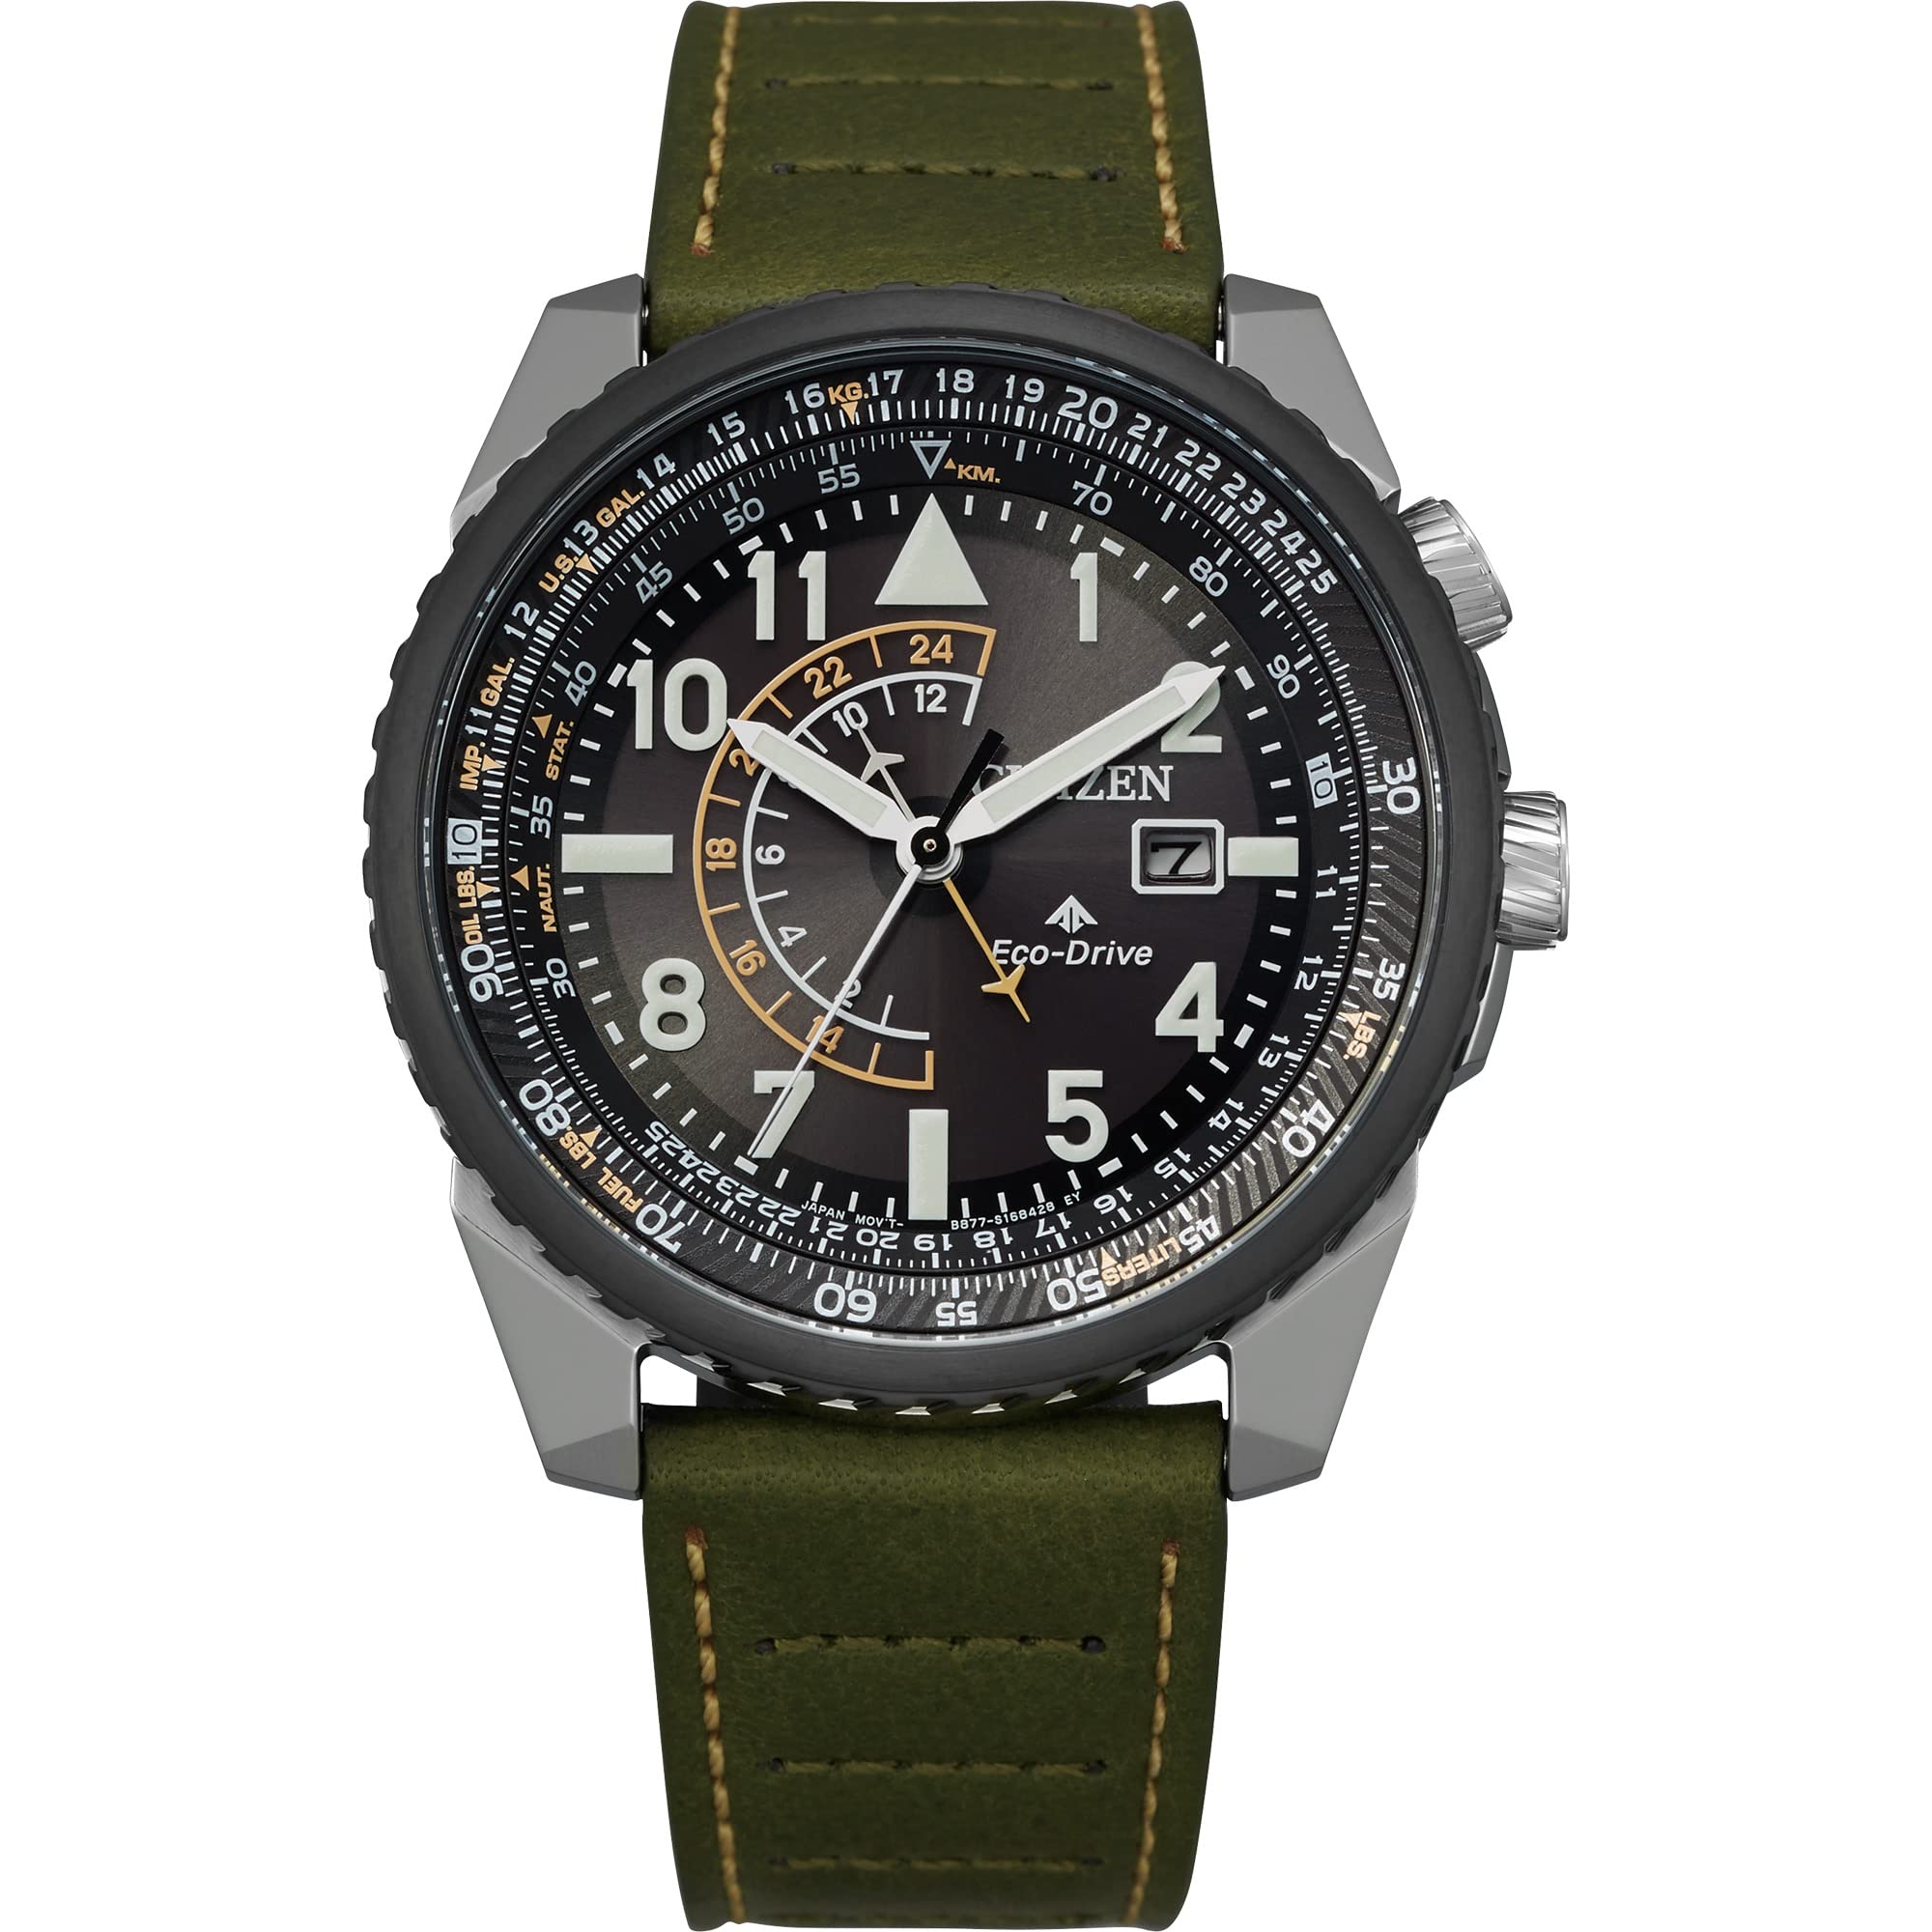 Citizen Men's Eco-Drive Promaster Air Nighthawk Pilot Watch in Stainless Steel with Olive Green Leather Strap, Black Dial (Model: BJ7138-04E)